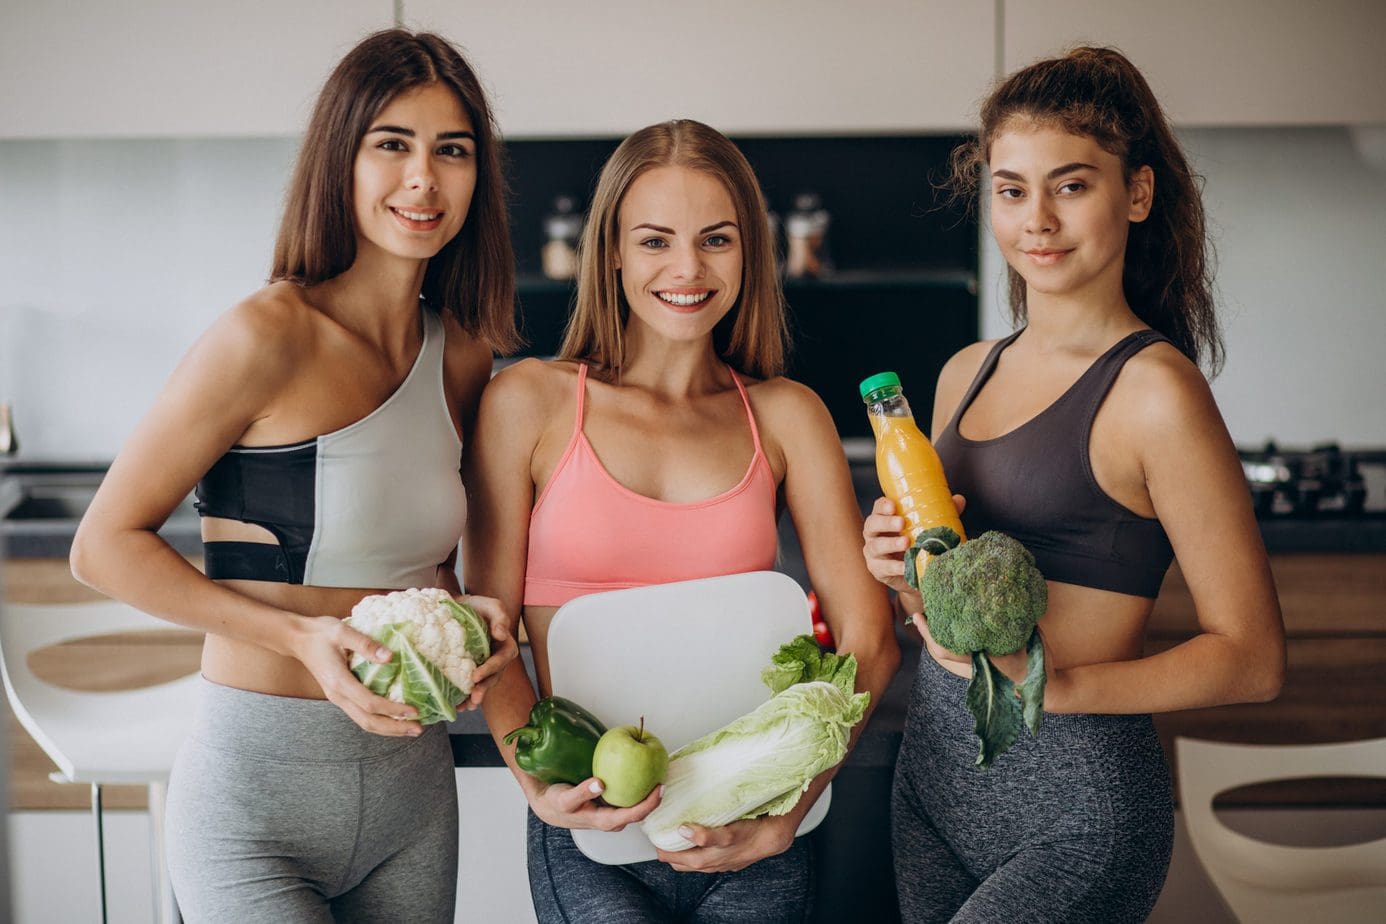 Why should physically active women eat green vegetables?